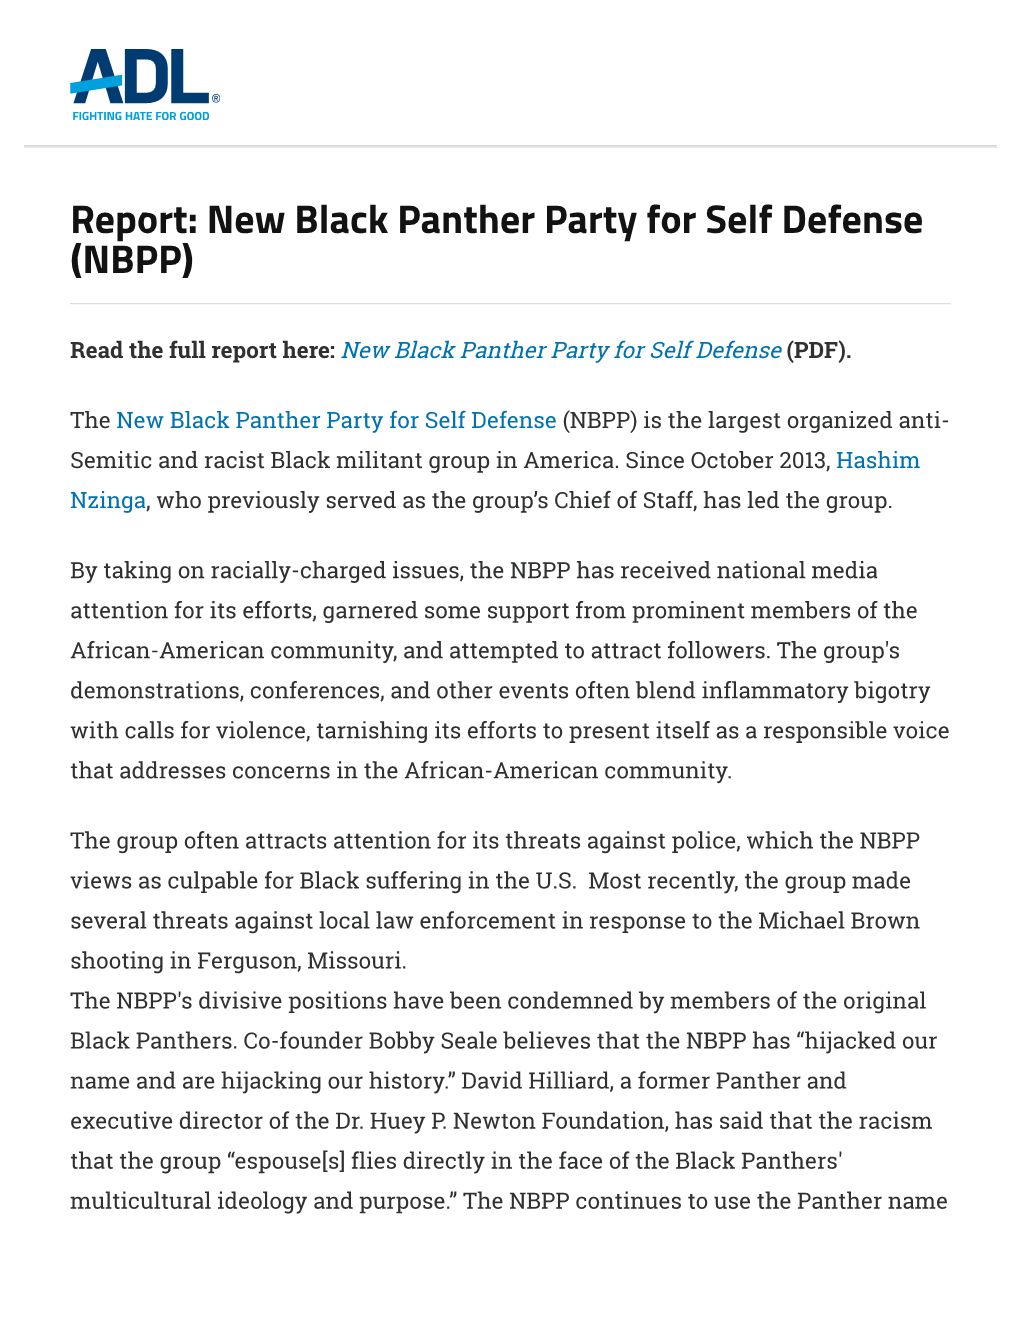 New Black Panther Party for Self Defense (NBPP)